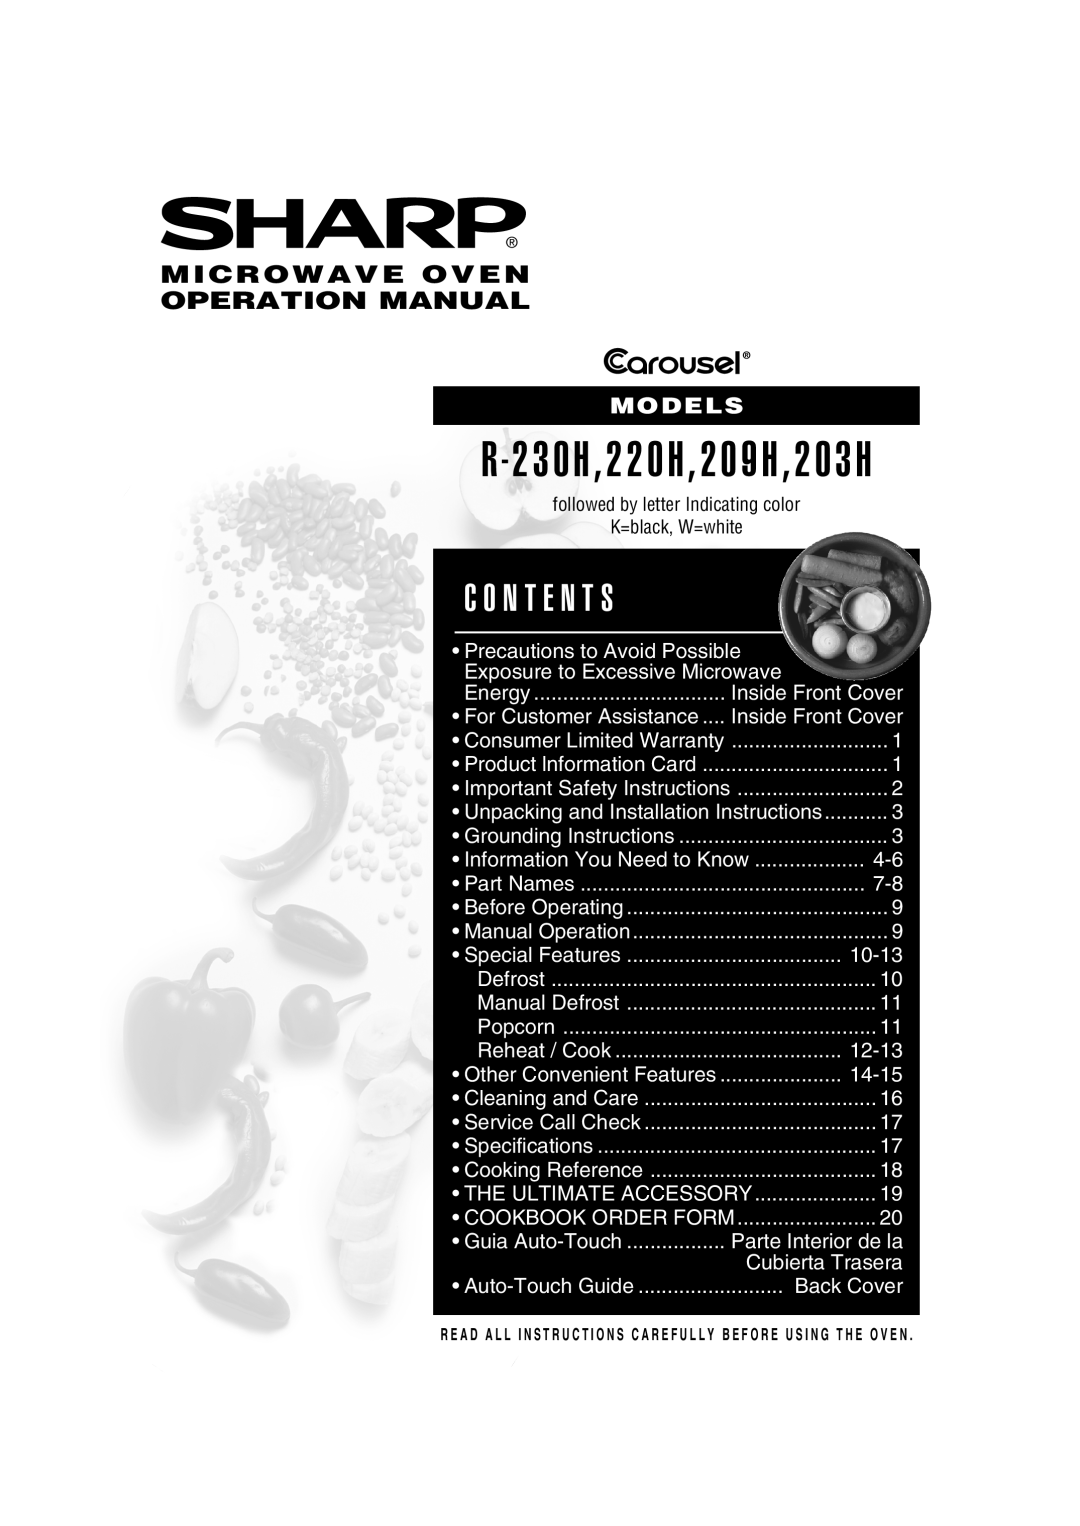 Sharp 209H operation manual R - 2 3 0 H , 2 2 0 H , 2 0 9 H , 2 0 3 H, C O N T E N T S, Microwave Oven Operation Manual 